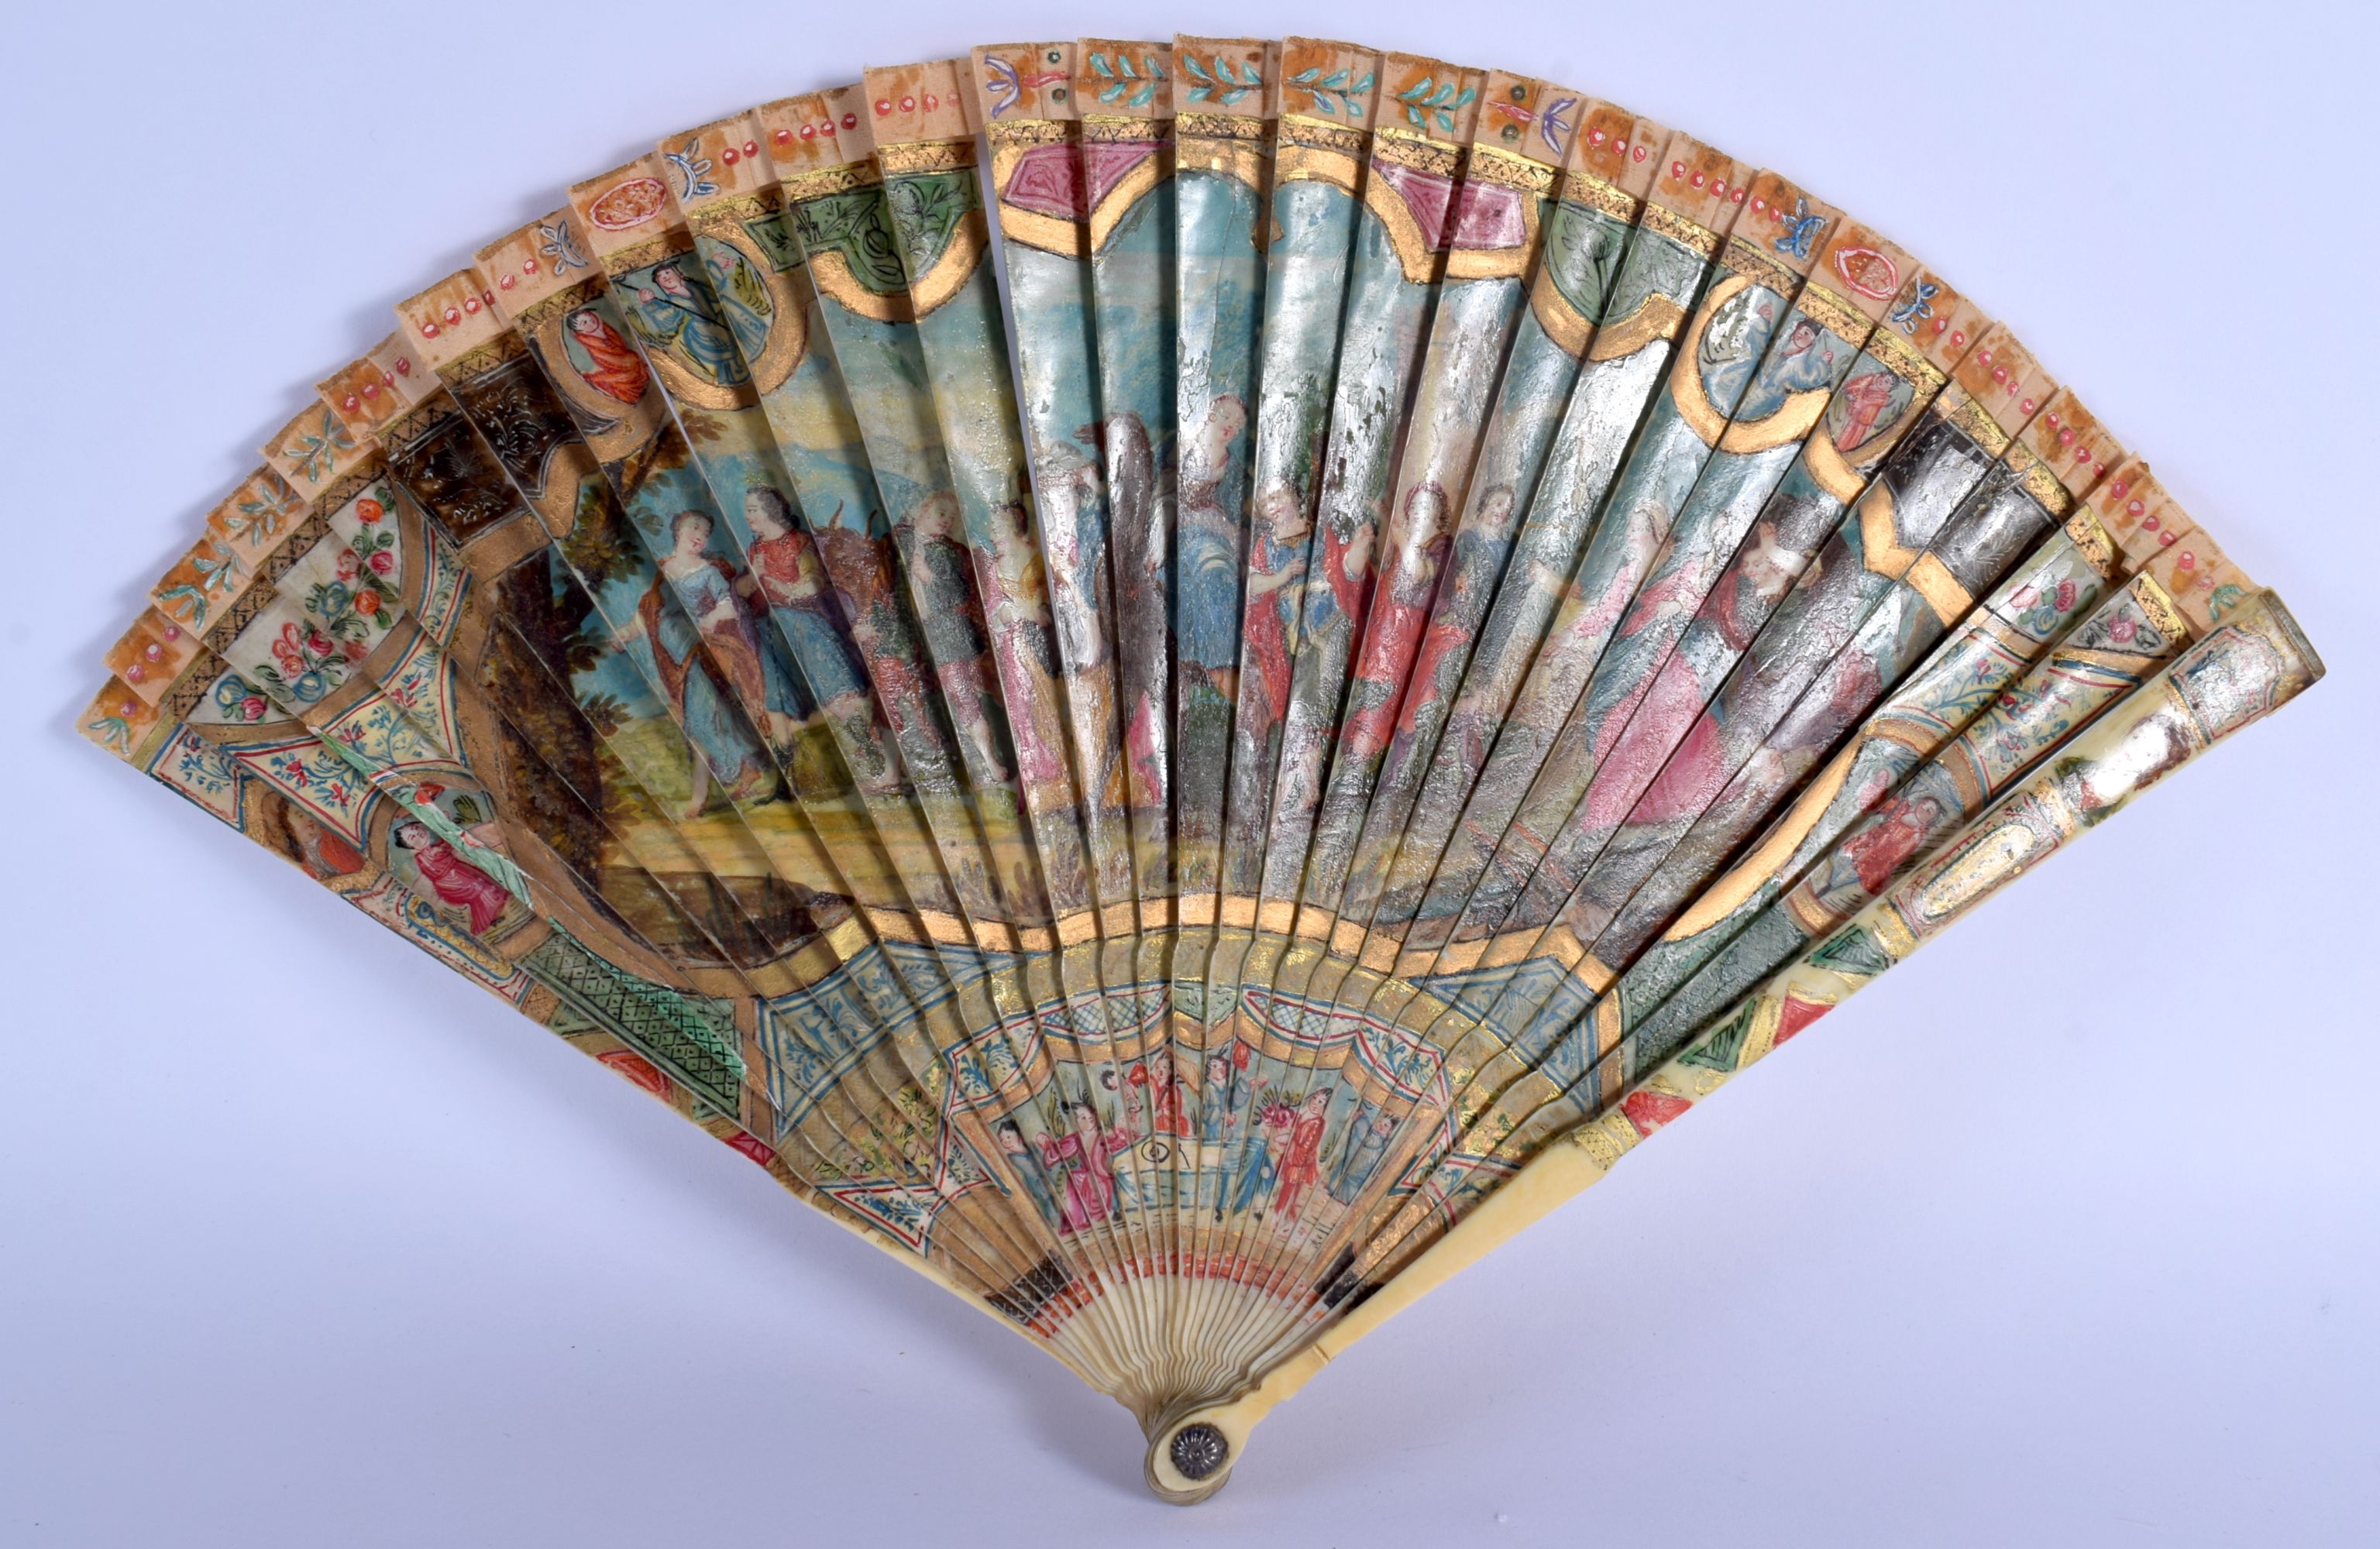 A RARE EARLY 19TH CENTURY EUROPEAN BRISE FAN of Verne Matin type. 30 cm wide extending. - Image 5 of 8